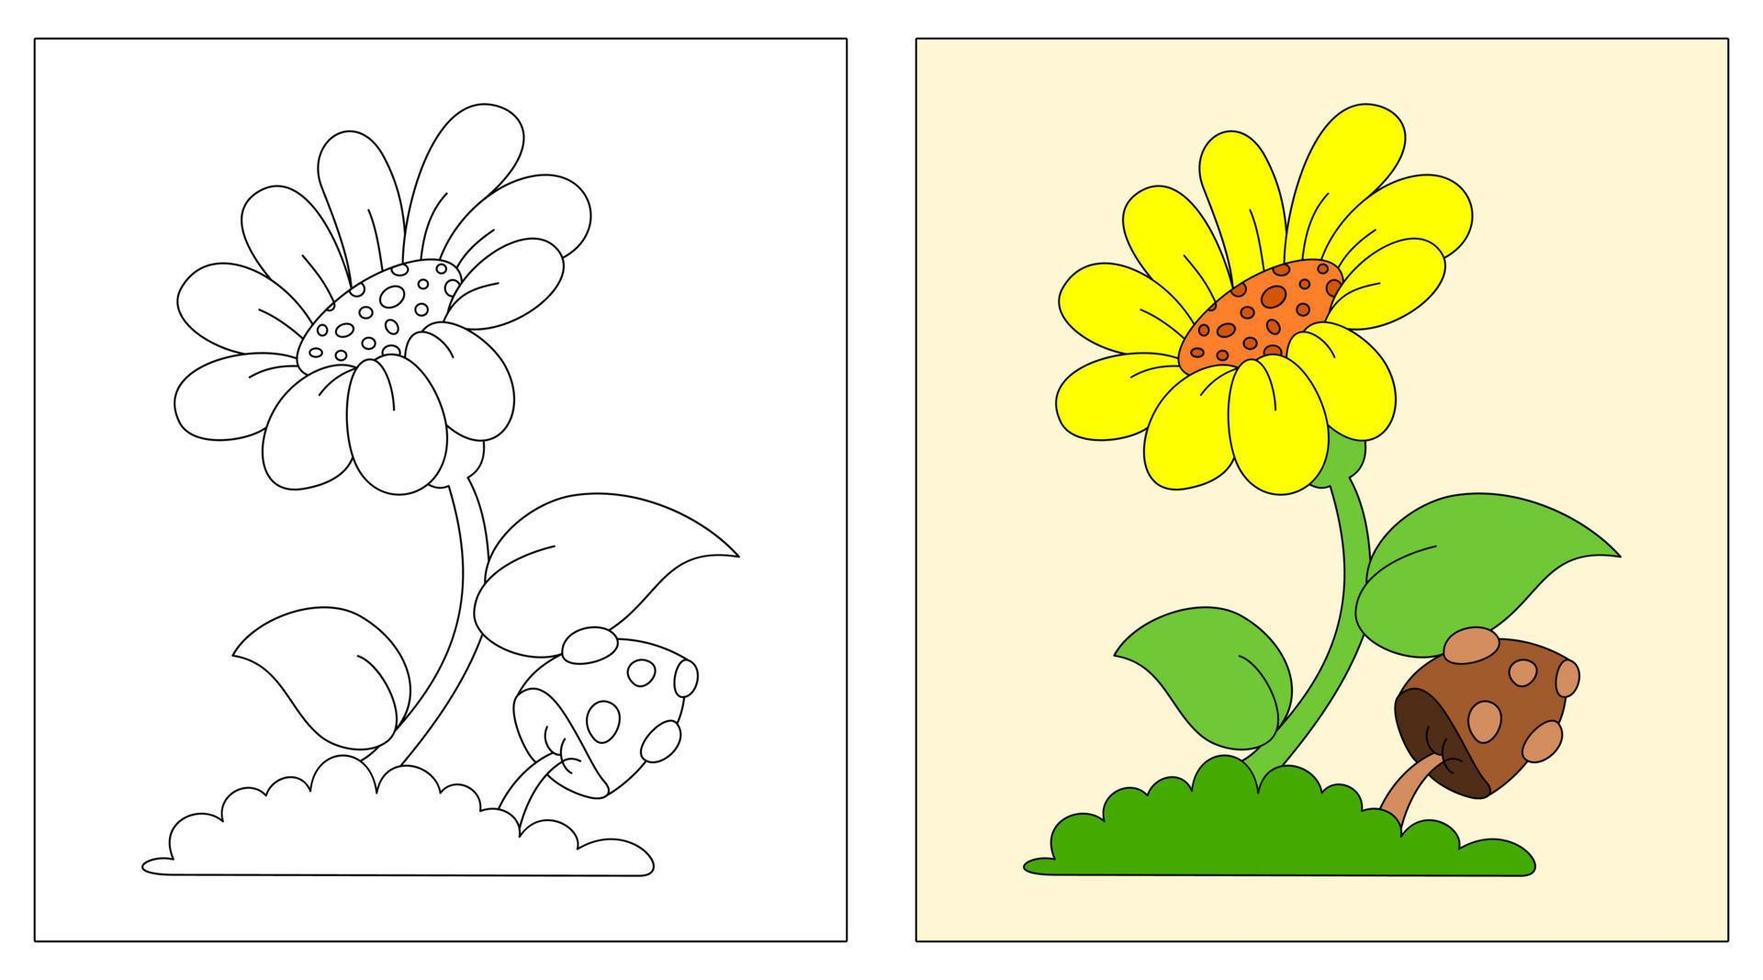 Coloring book - painting for kids Royalty Free Vector Image